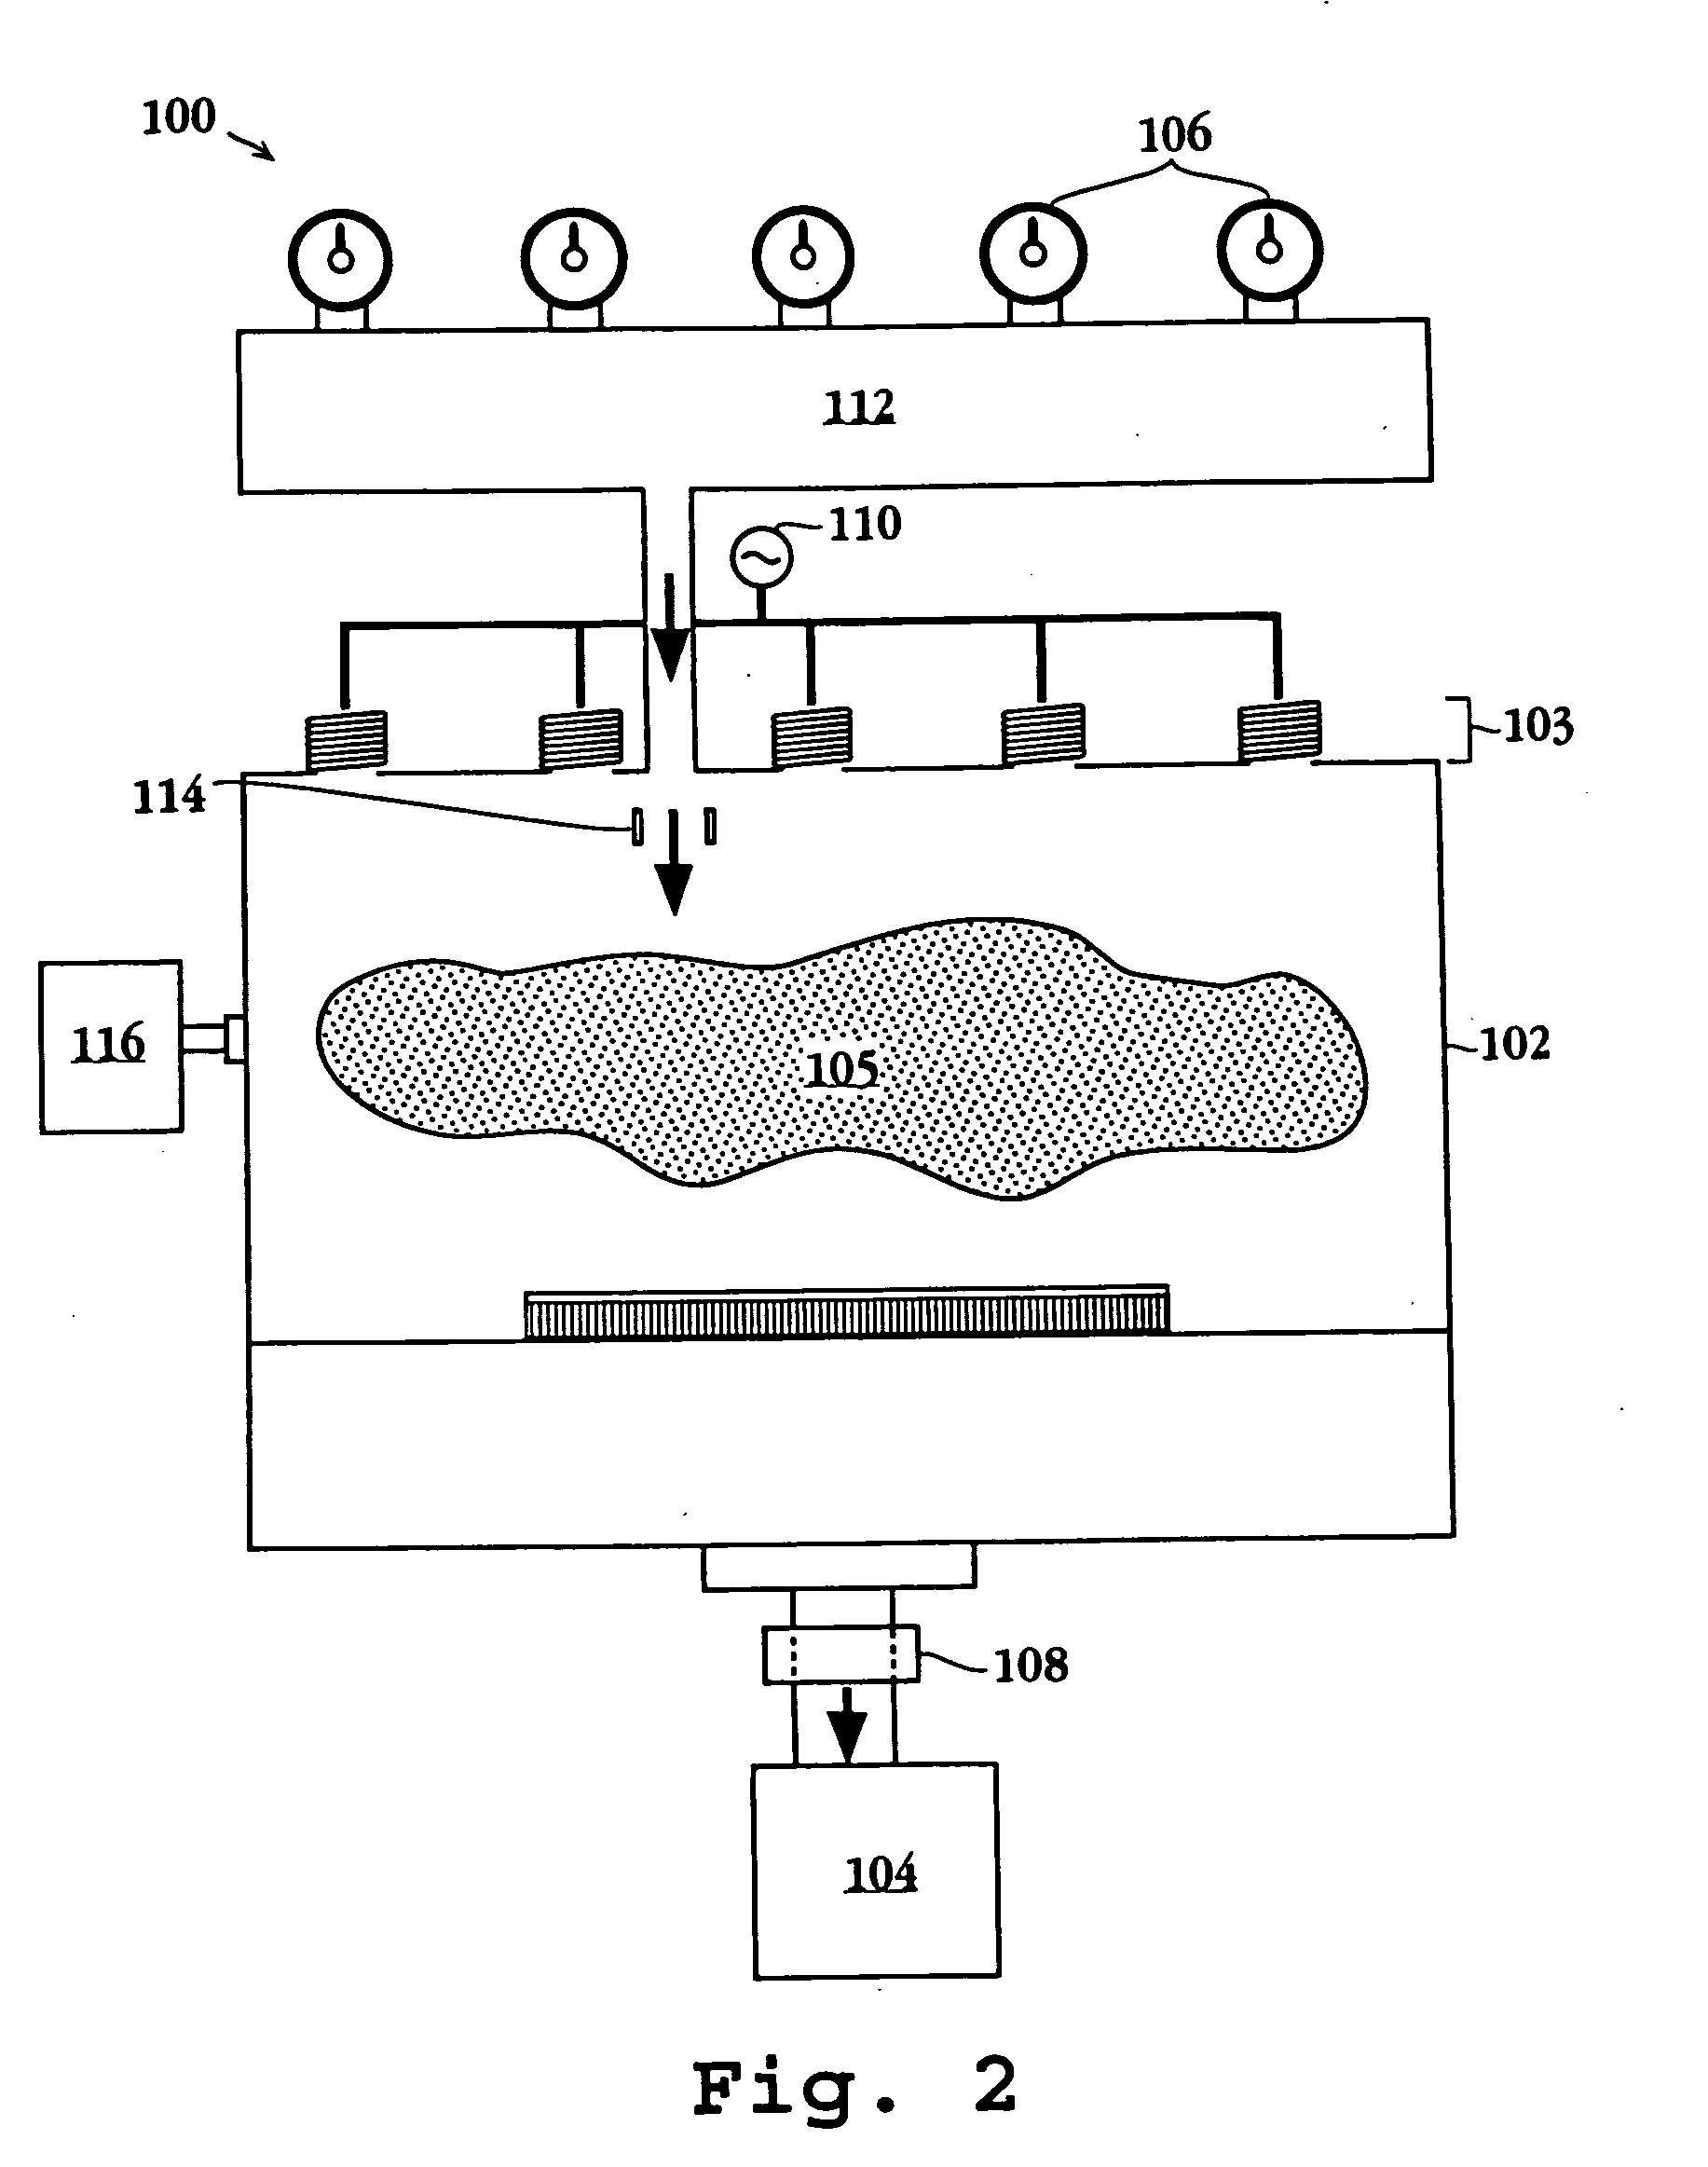 Plasma cleaning of deposition chamber residues using duo-step wafer-less auto clean method